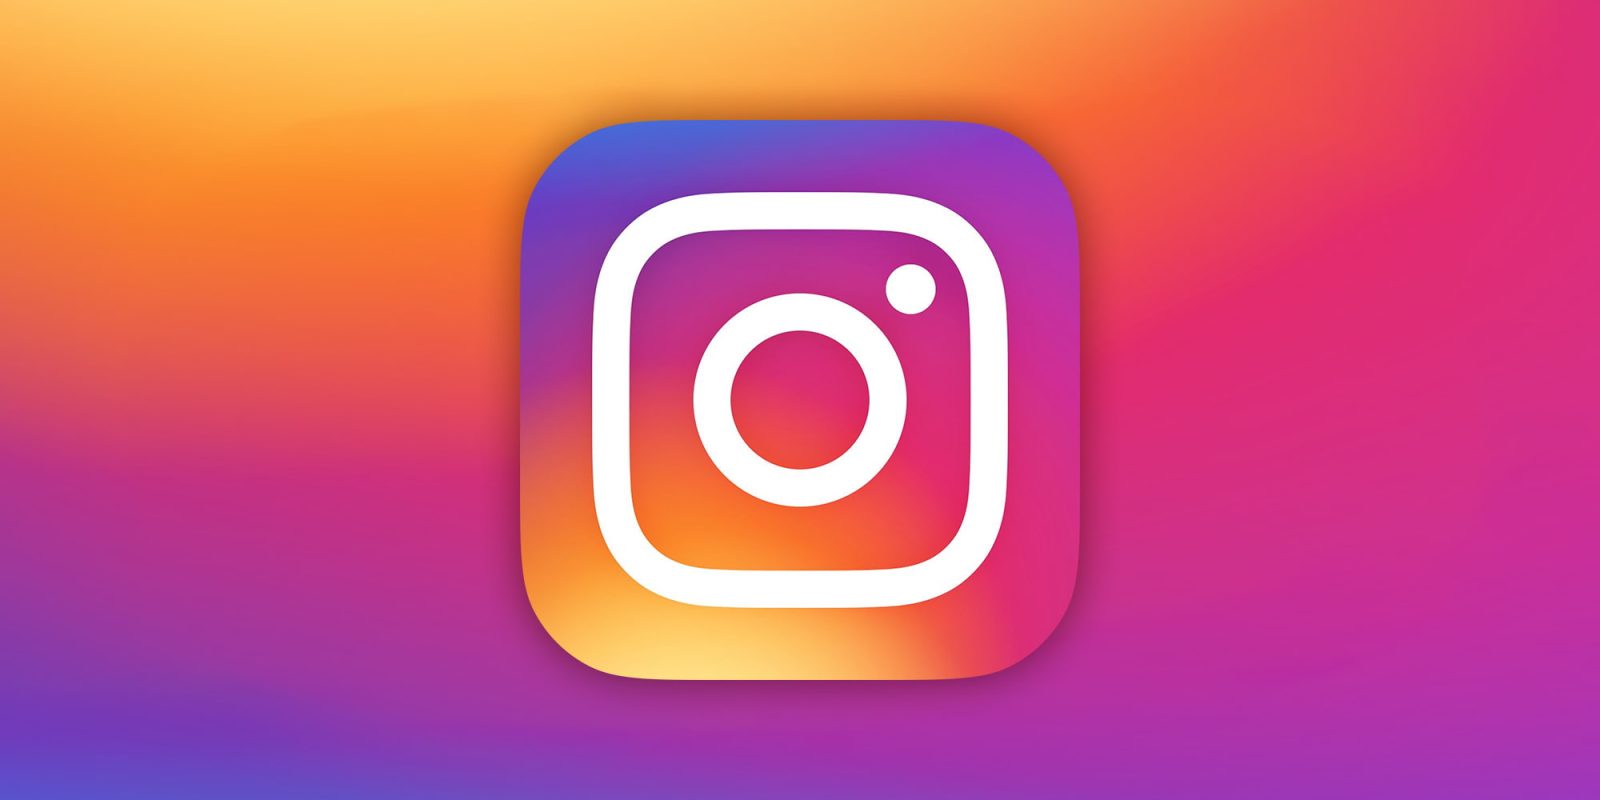 Instagram icon on a gradient of Instagram colors